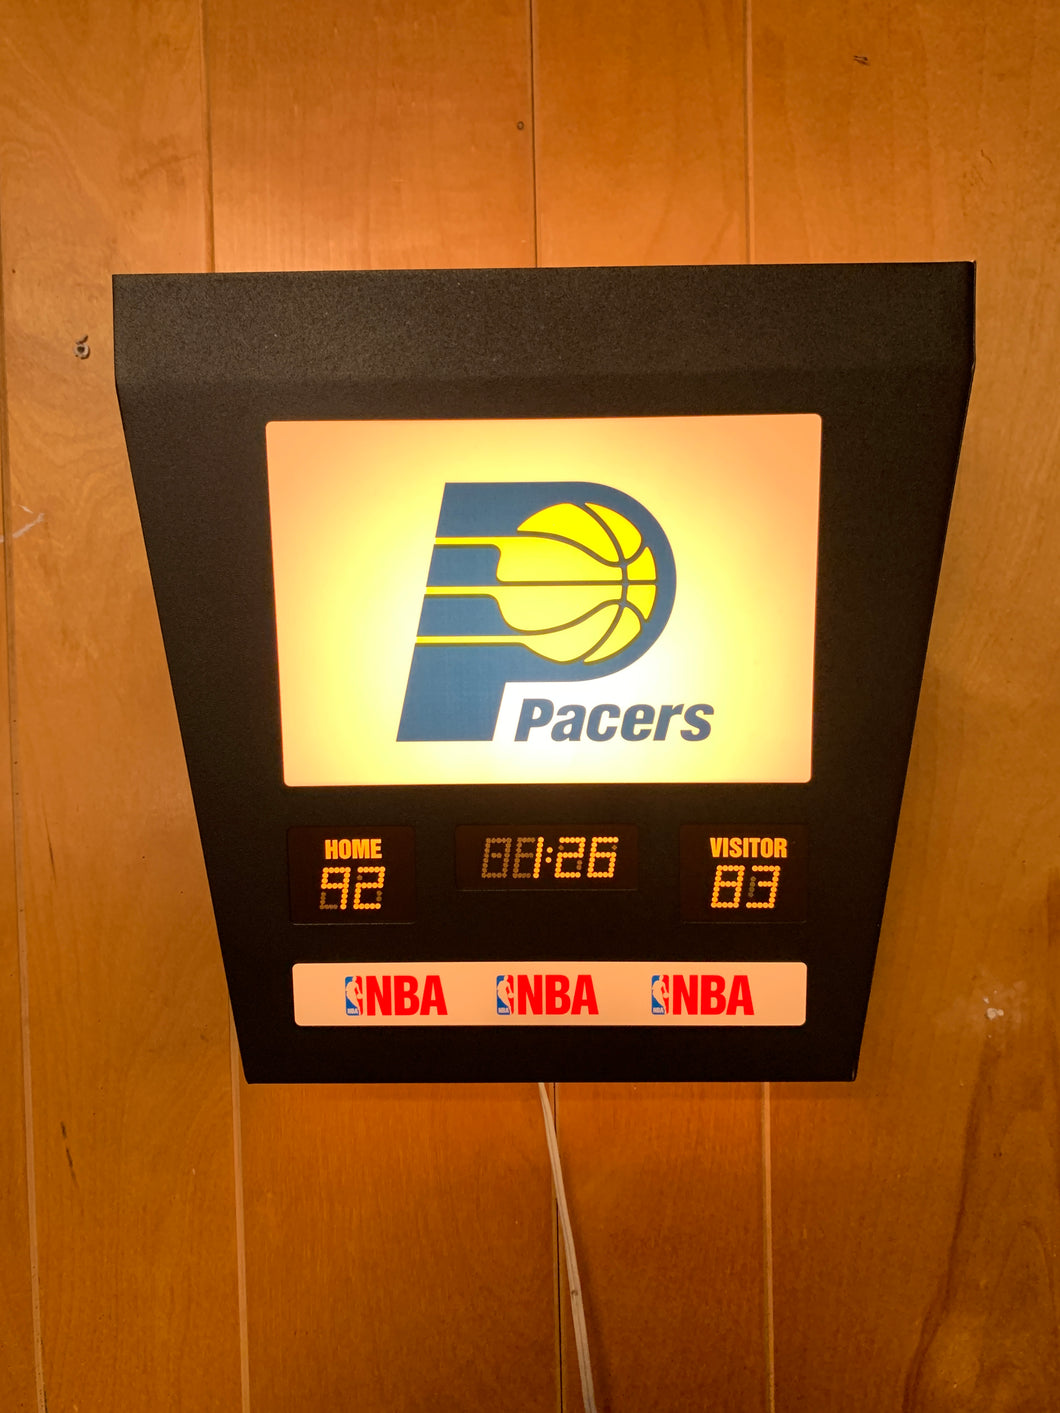 Indiana Pacers x NBA Scoreboard x Vintage Wall Lamp